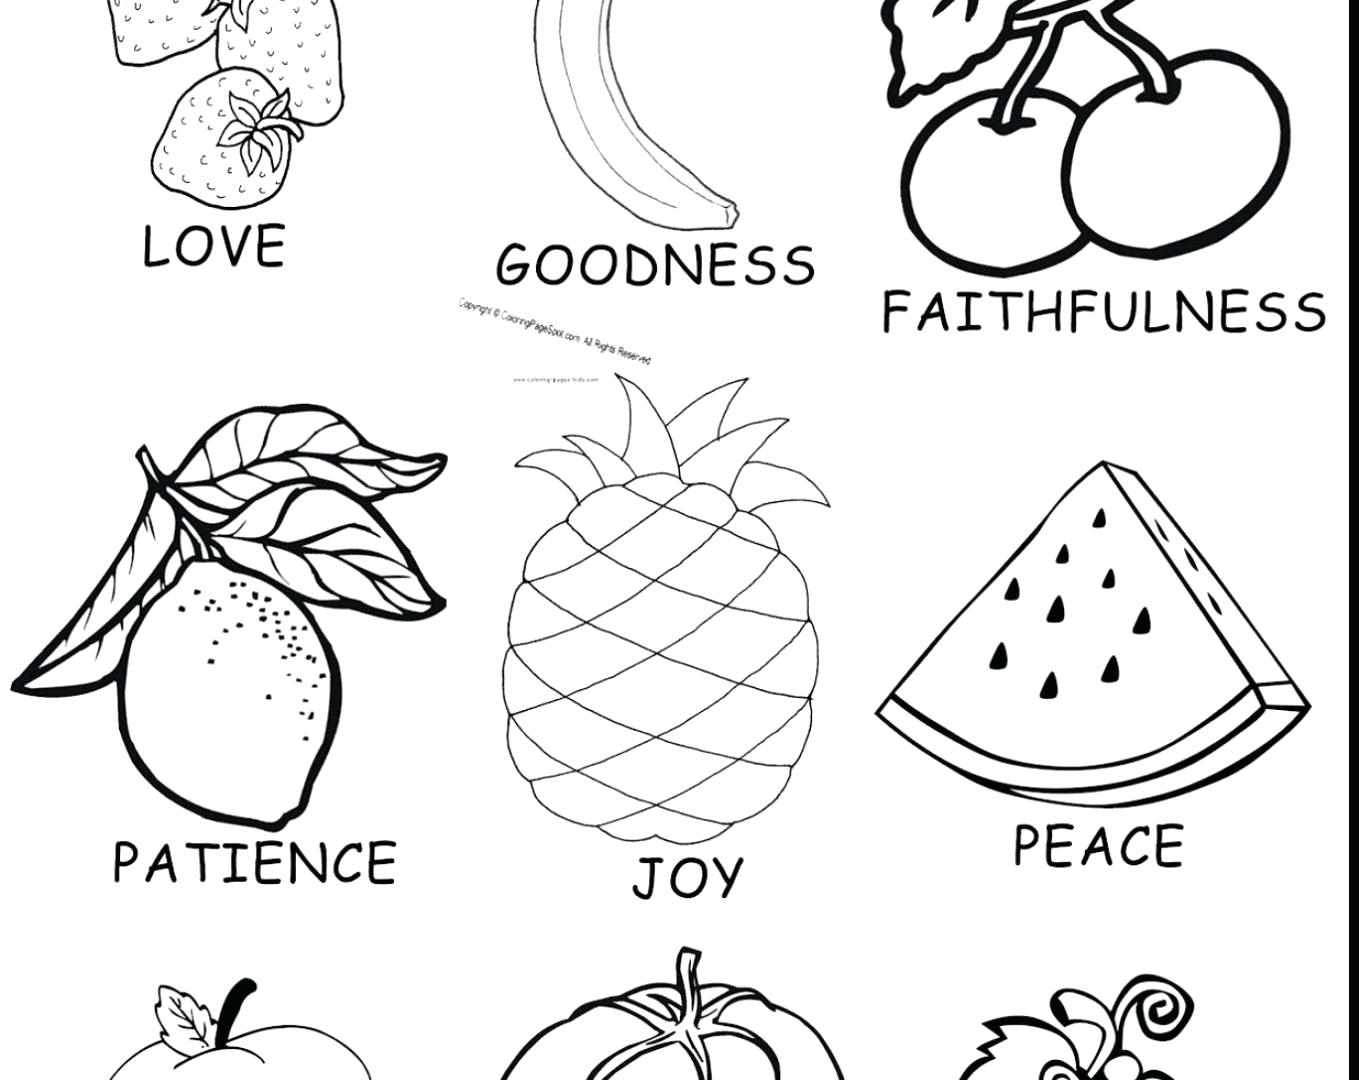 Coffee Table : Fruit Of The Spirit Coloring Pages Adult Beach ...